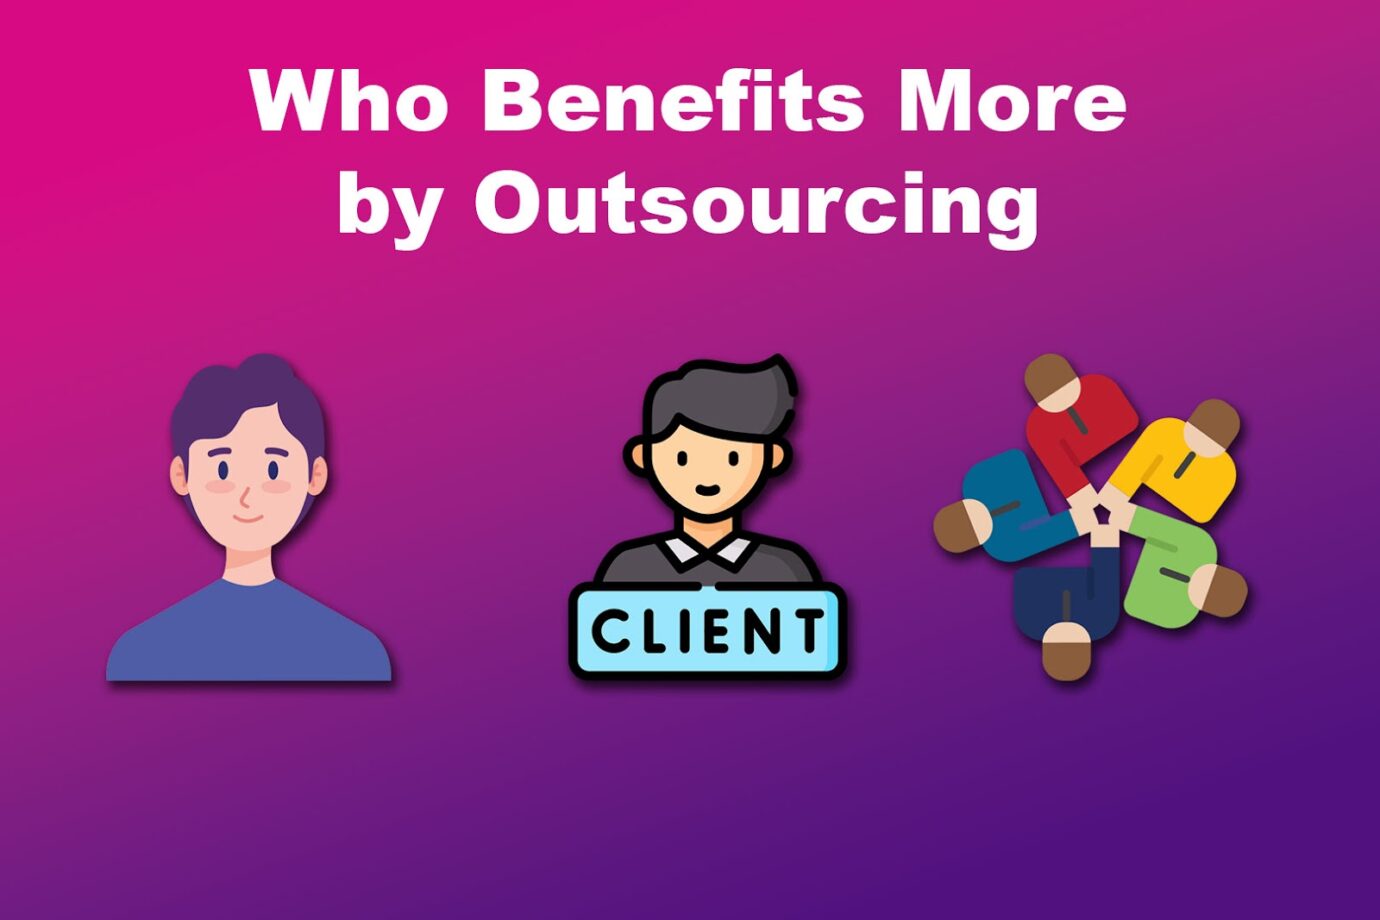 Who Benefits More by Outsourcing